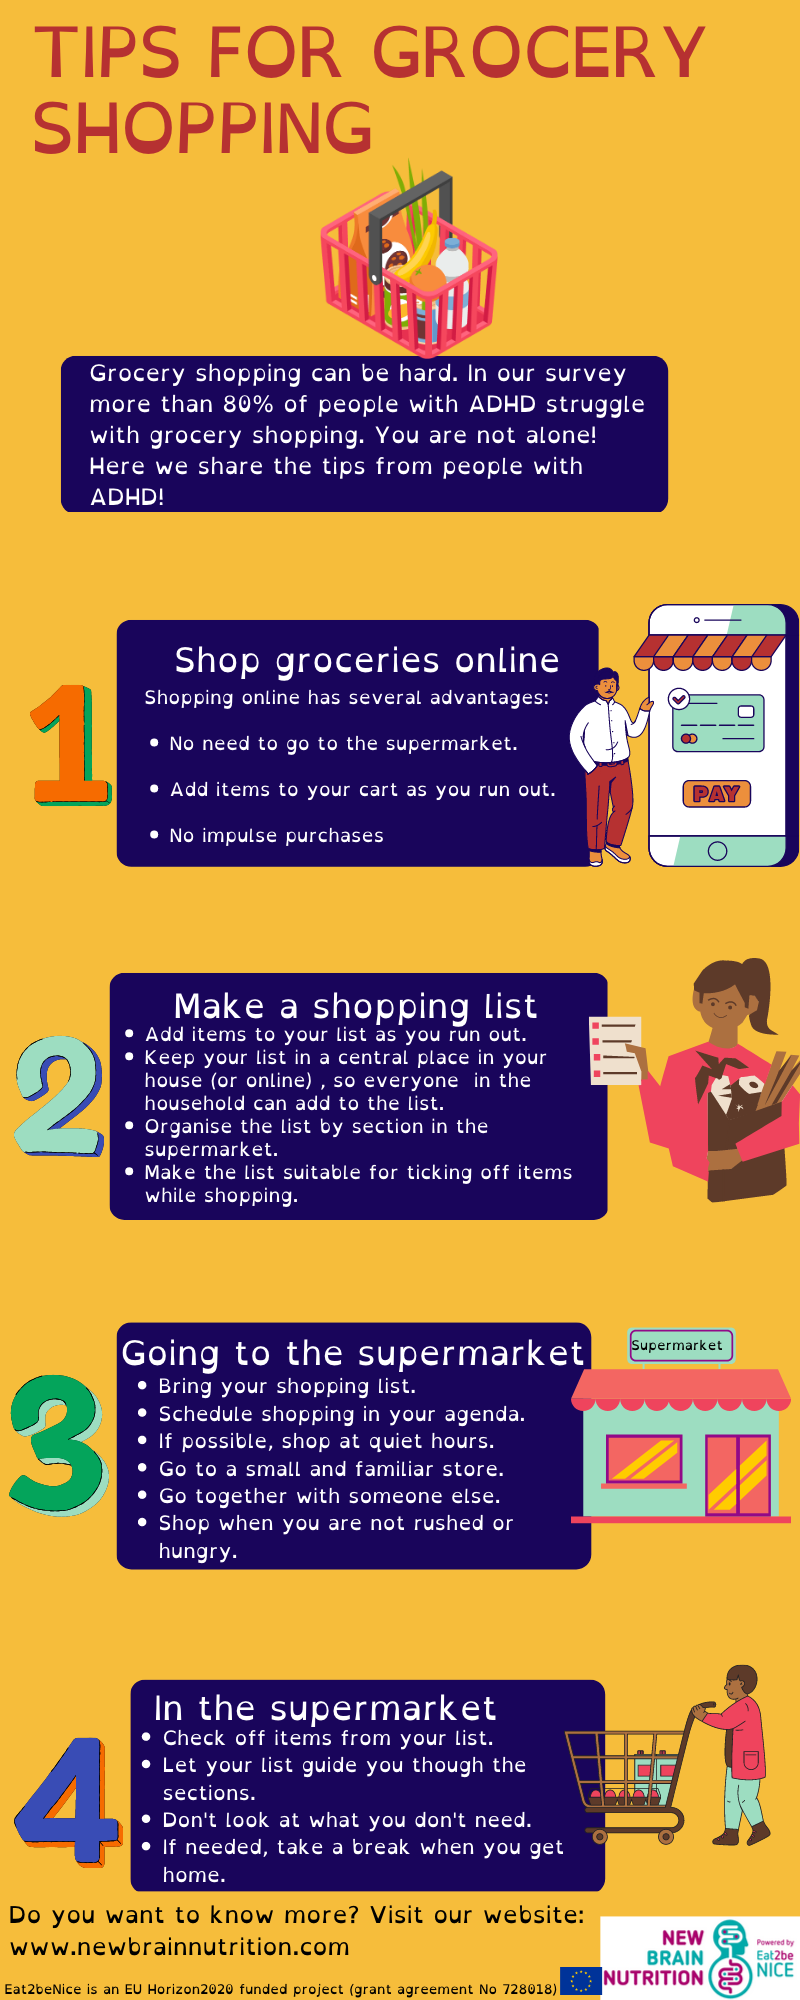 Tips for grocery shopping with ADHD